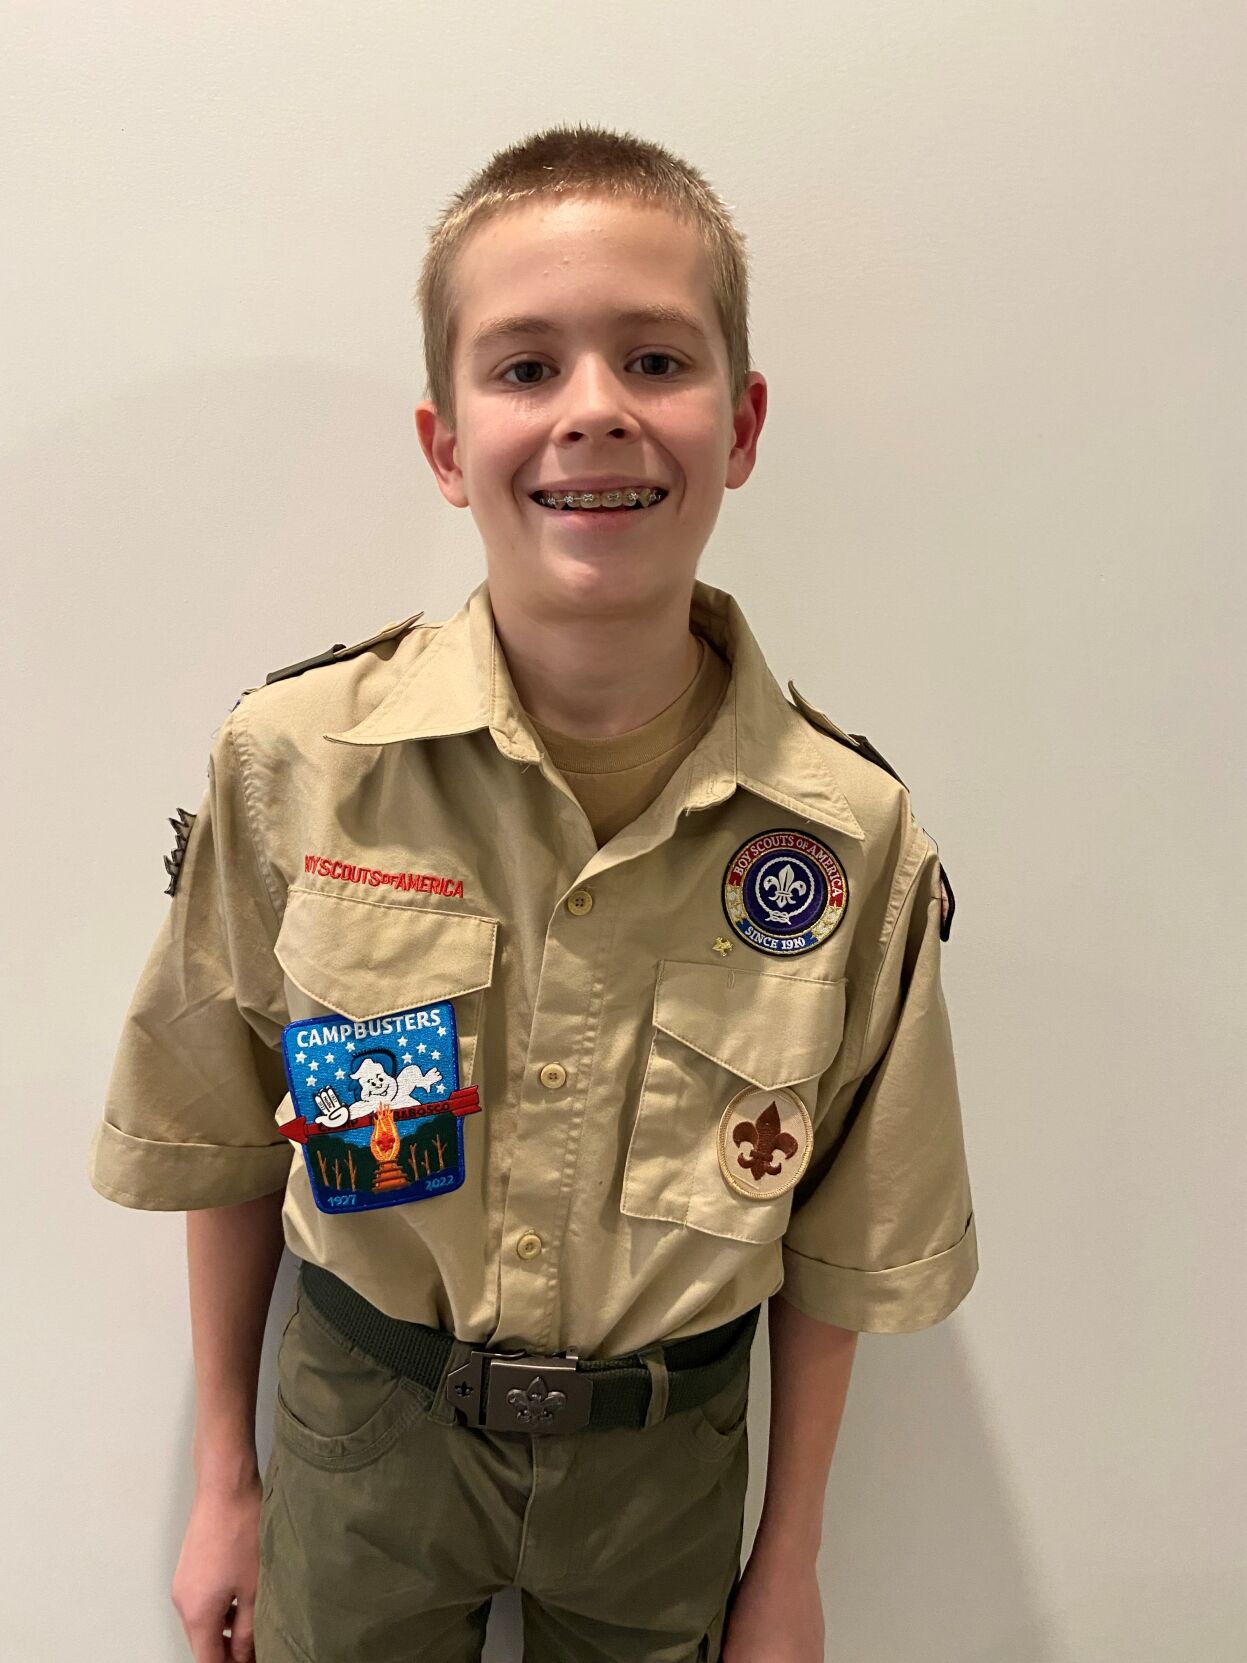 Youngster finds path to success through the Boy Scouts